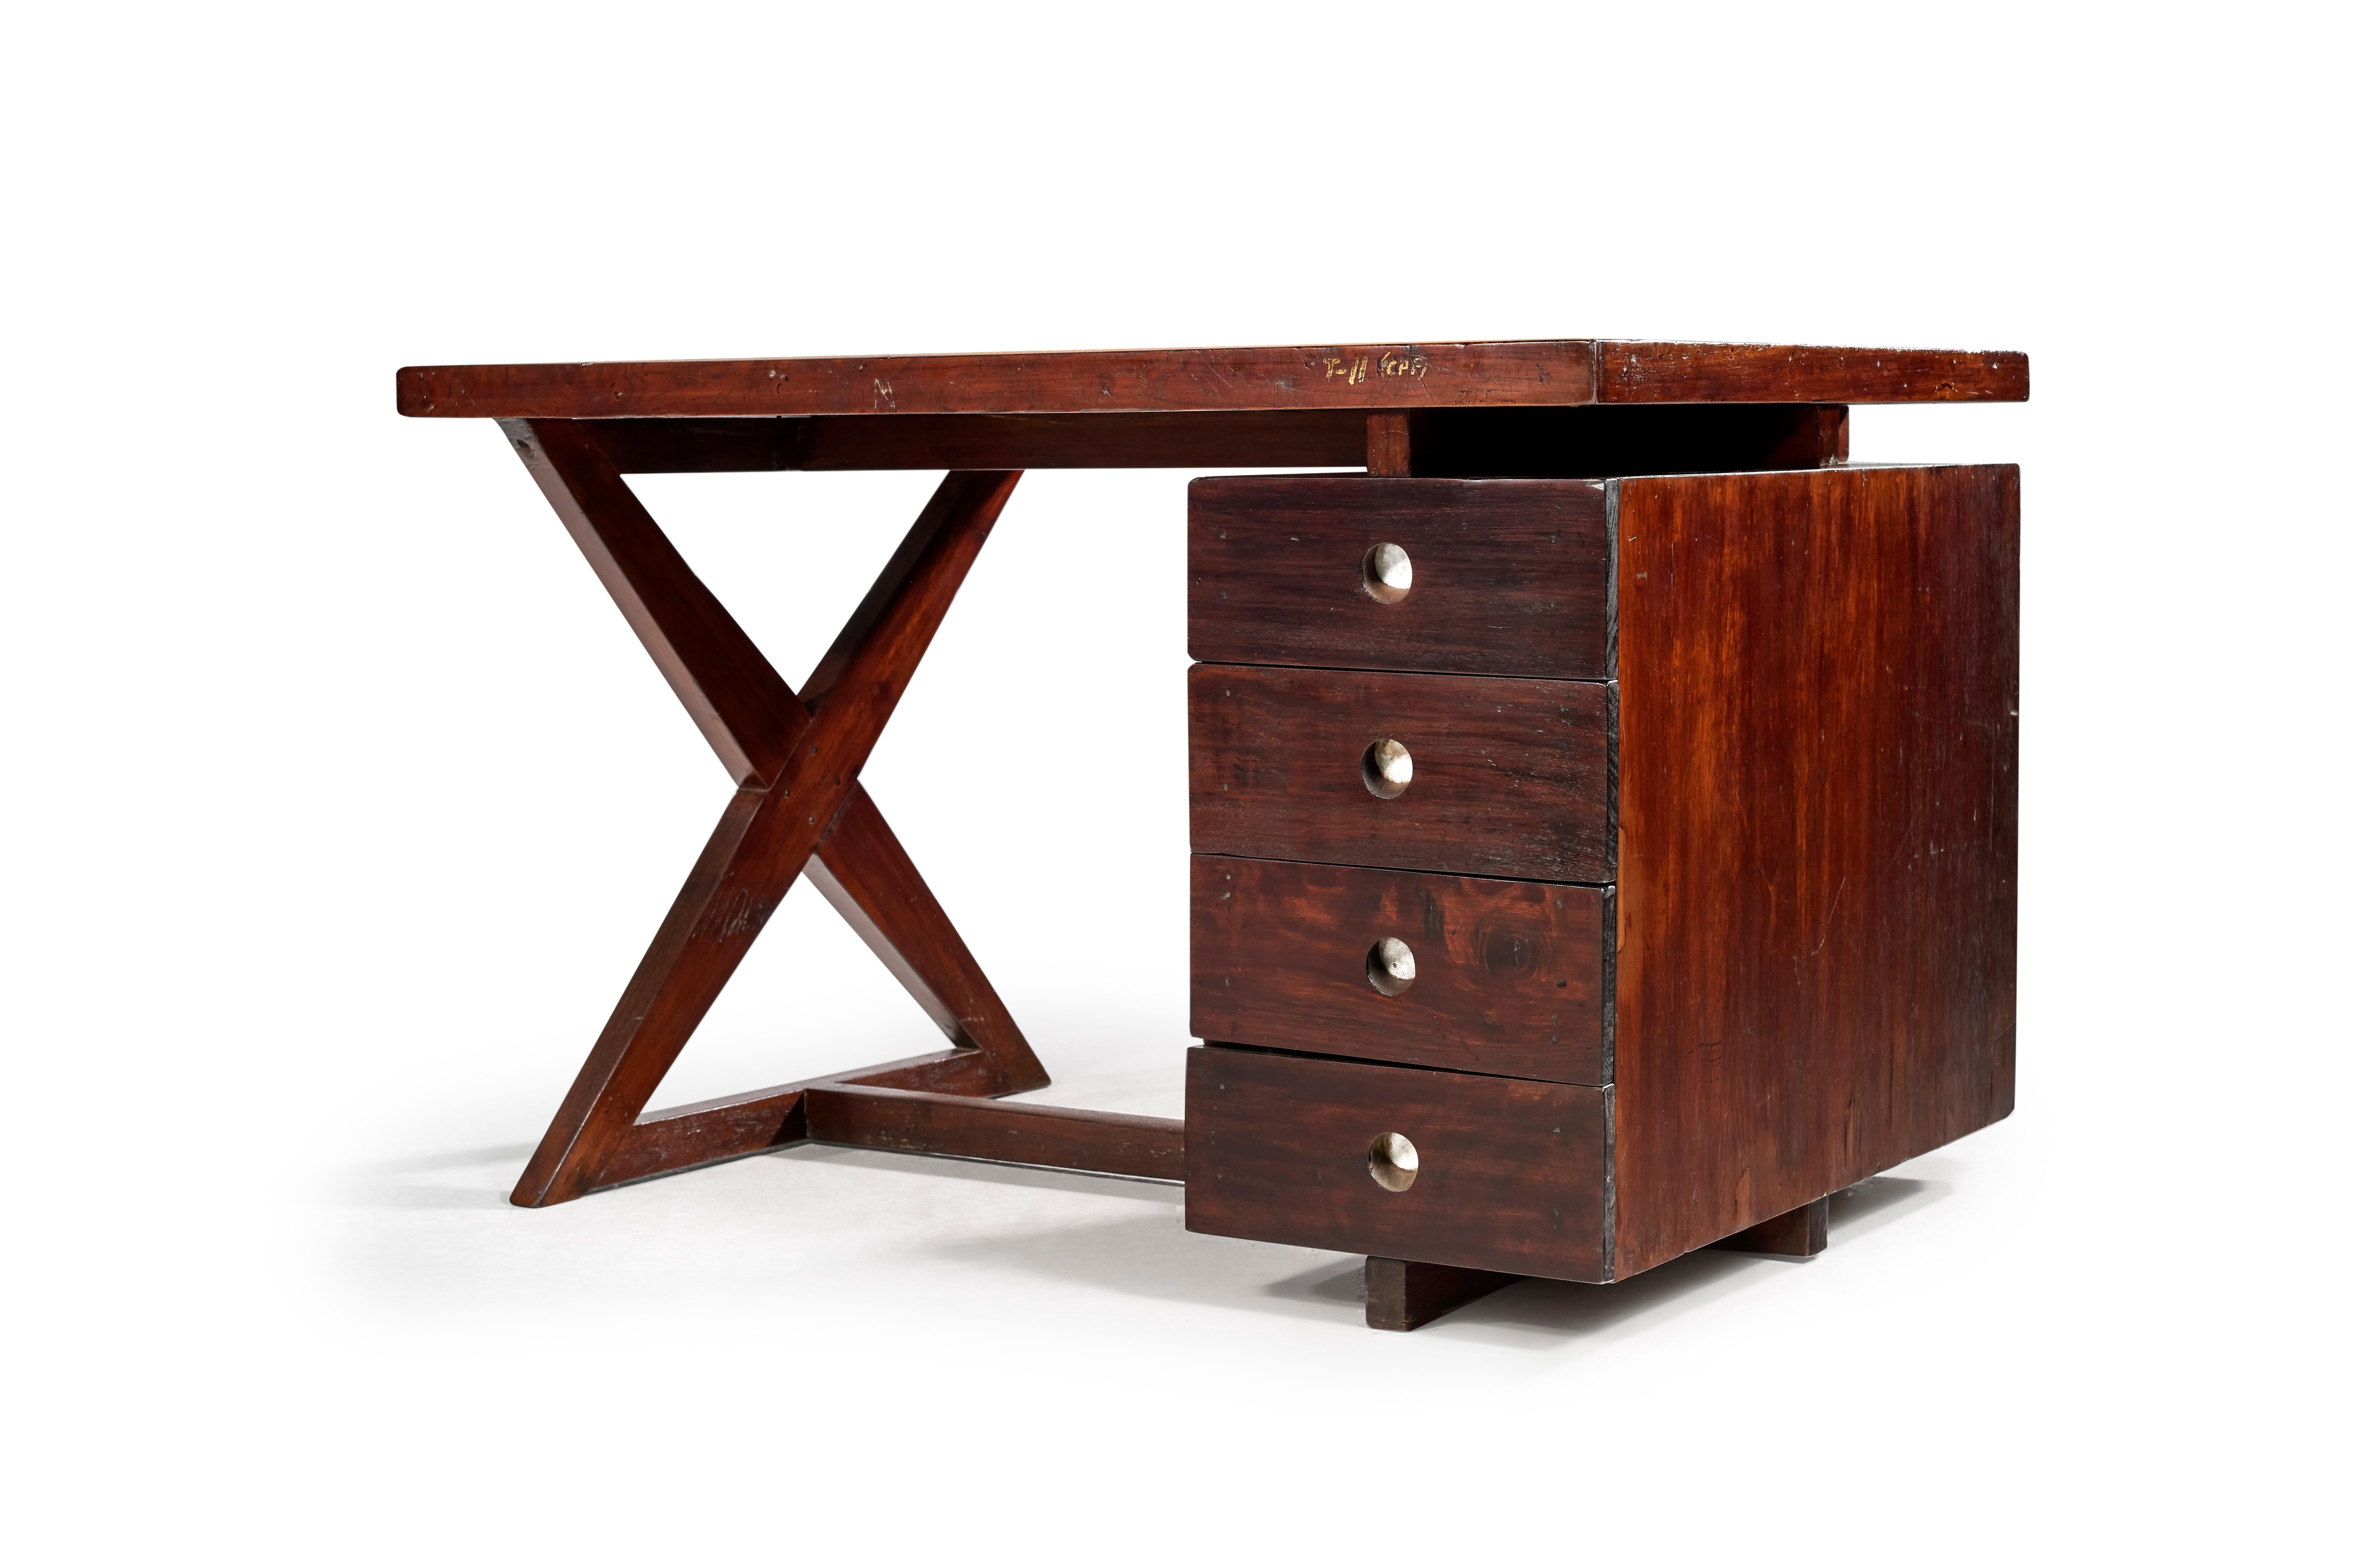 Pierre Jeanneret (1896-1967)
Inde
Administrative desk, c.1960
Tabletop fixed on a X-shaped leg and a drawer unit with aluminum bottom.
Solid and plated teak.
Administrative buildings.
Secretariat (1958). Various admin. buildings, Chandigarh,